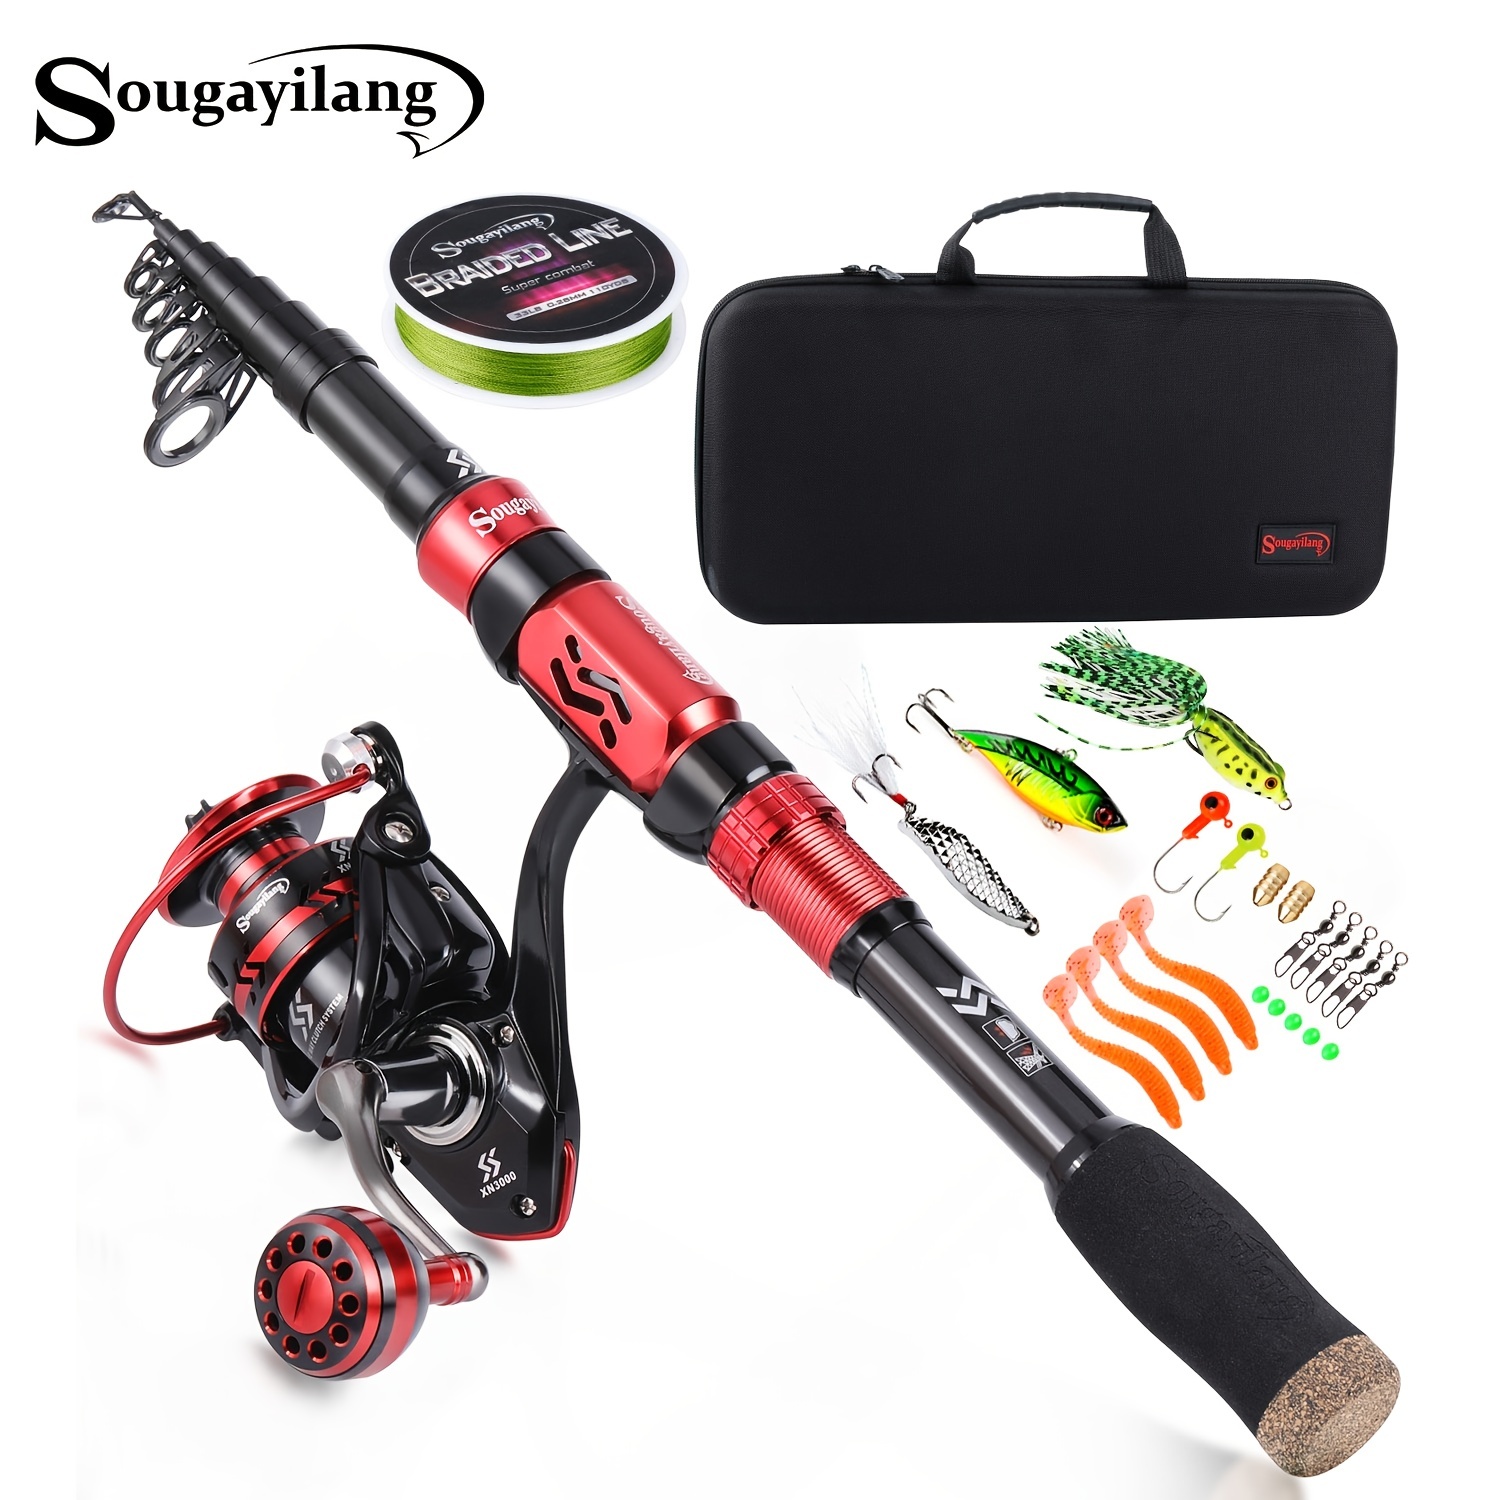 Sougayilang Fishing Rod And Reel Combos, Including Telescopic Fishing Pole,  12+1BB Spinning Reel, Fishing Lure Bait And Hook Accessories, Fishing Gear